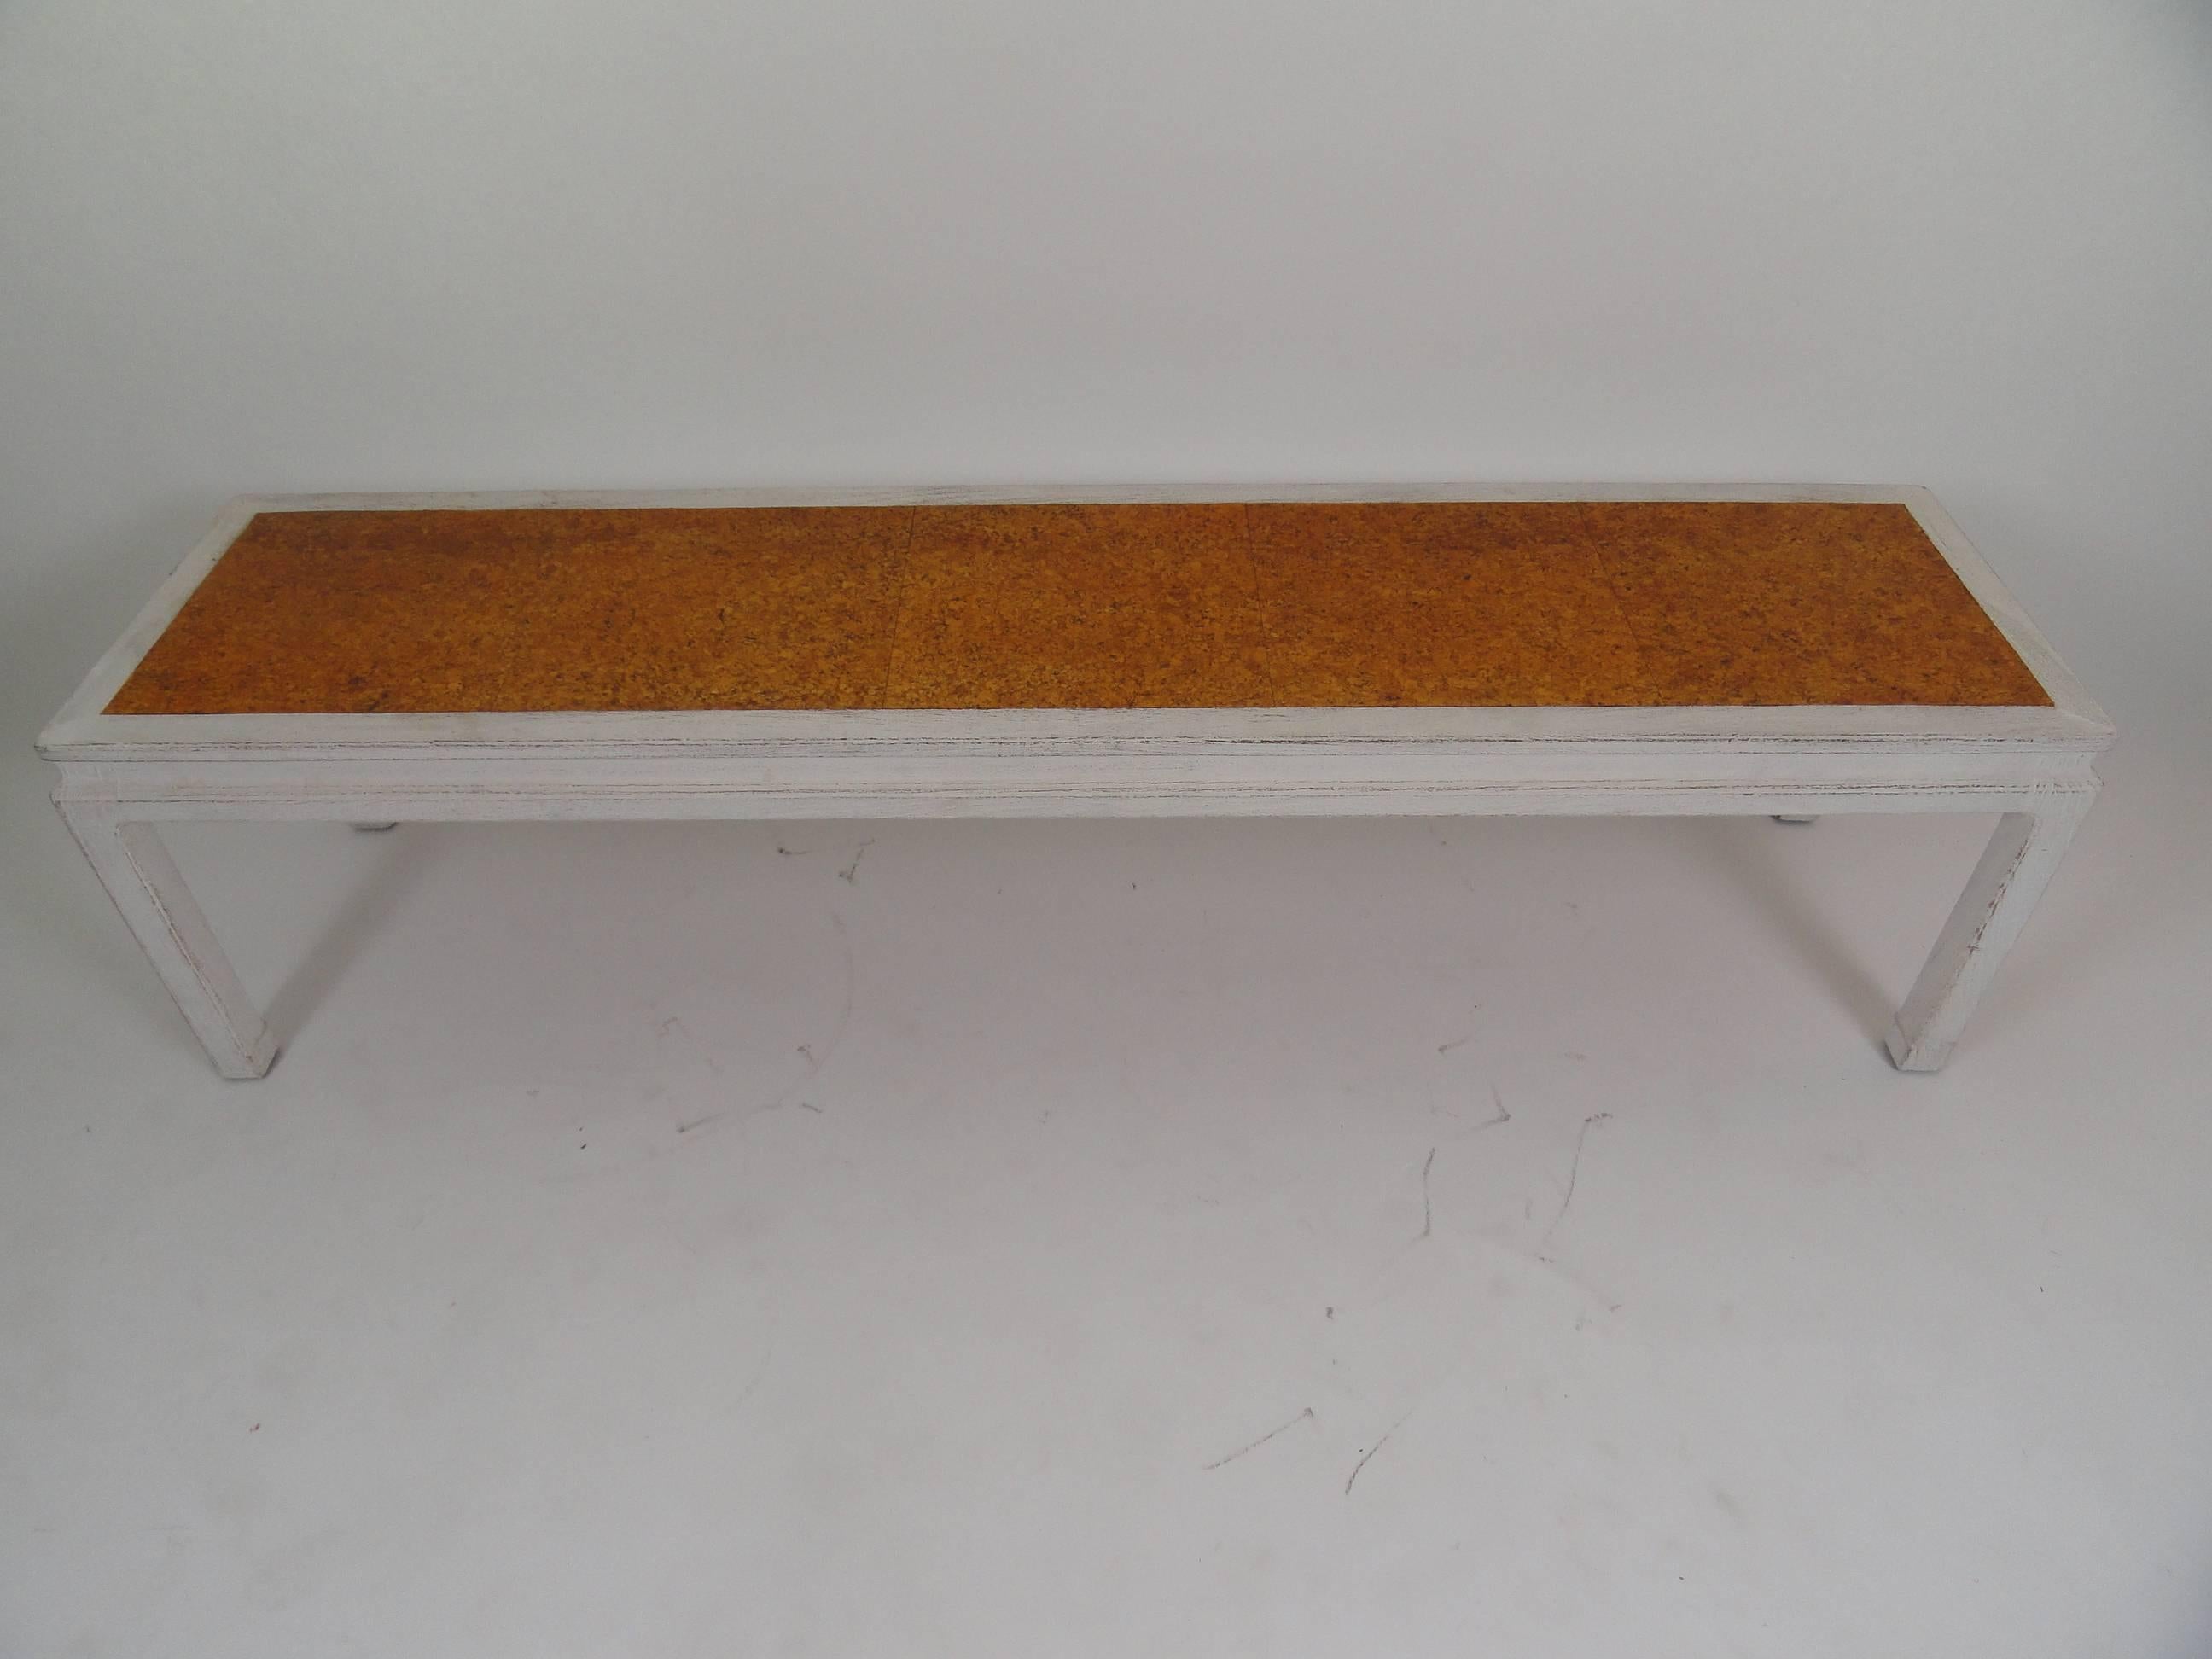 Modern Dunbar coffee table with cork top by Edward Wormley. Table has a rough wood finish with a brushed off-white painted finish. Tag on bottom.